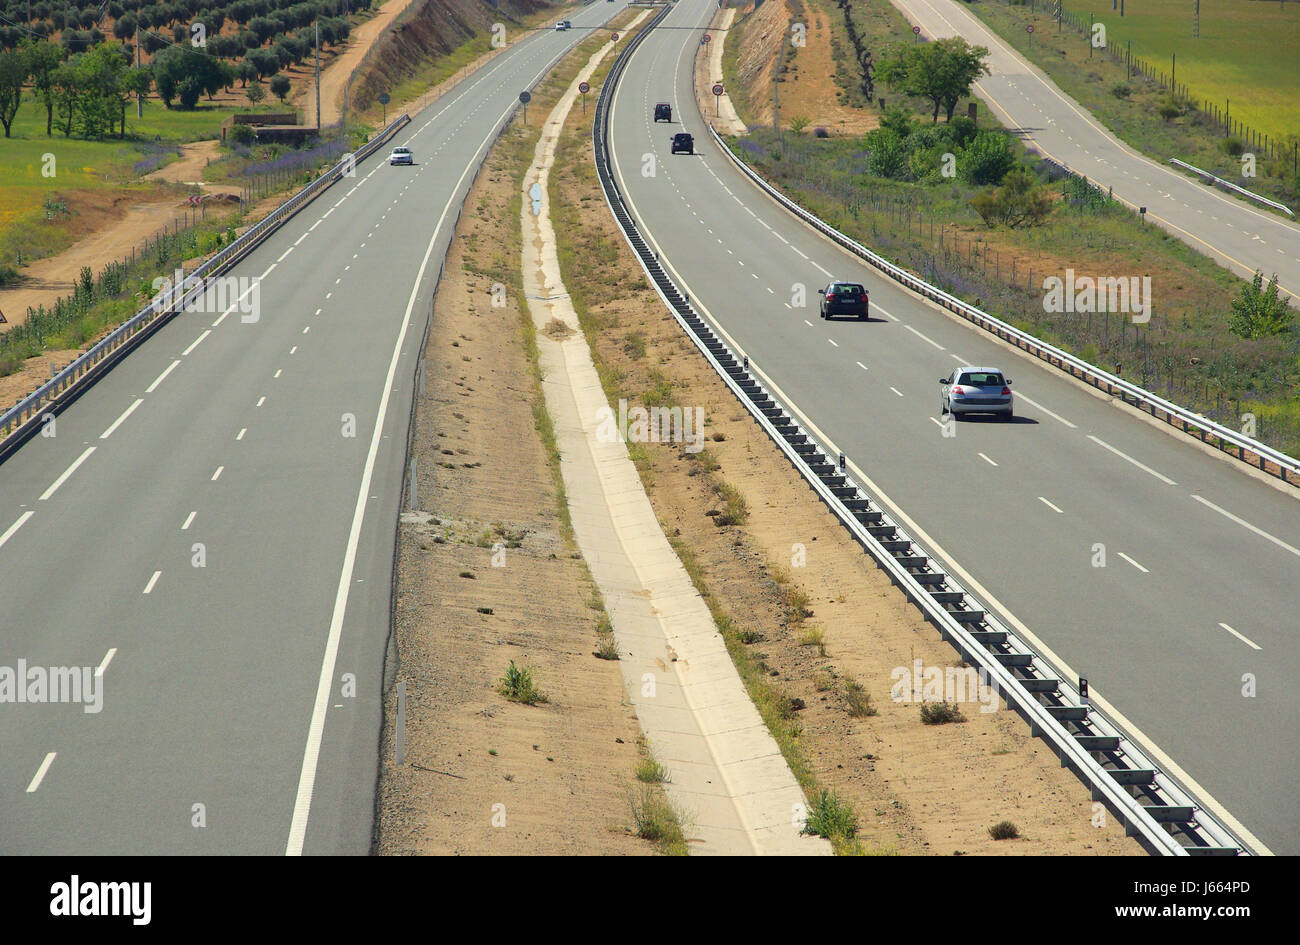 new spain connection connectivity interface annexation motorway highway street Stock Photo